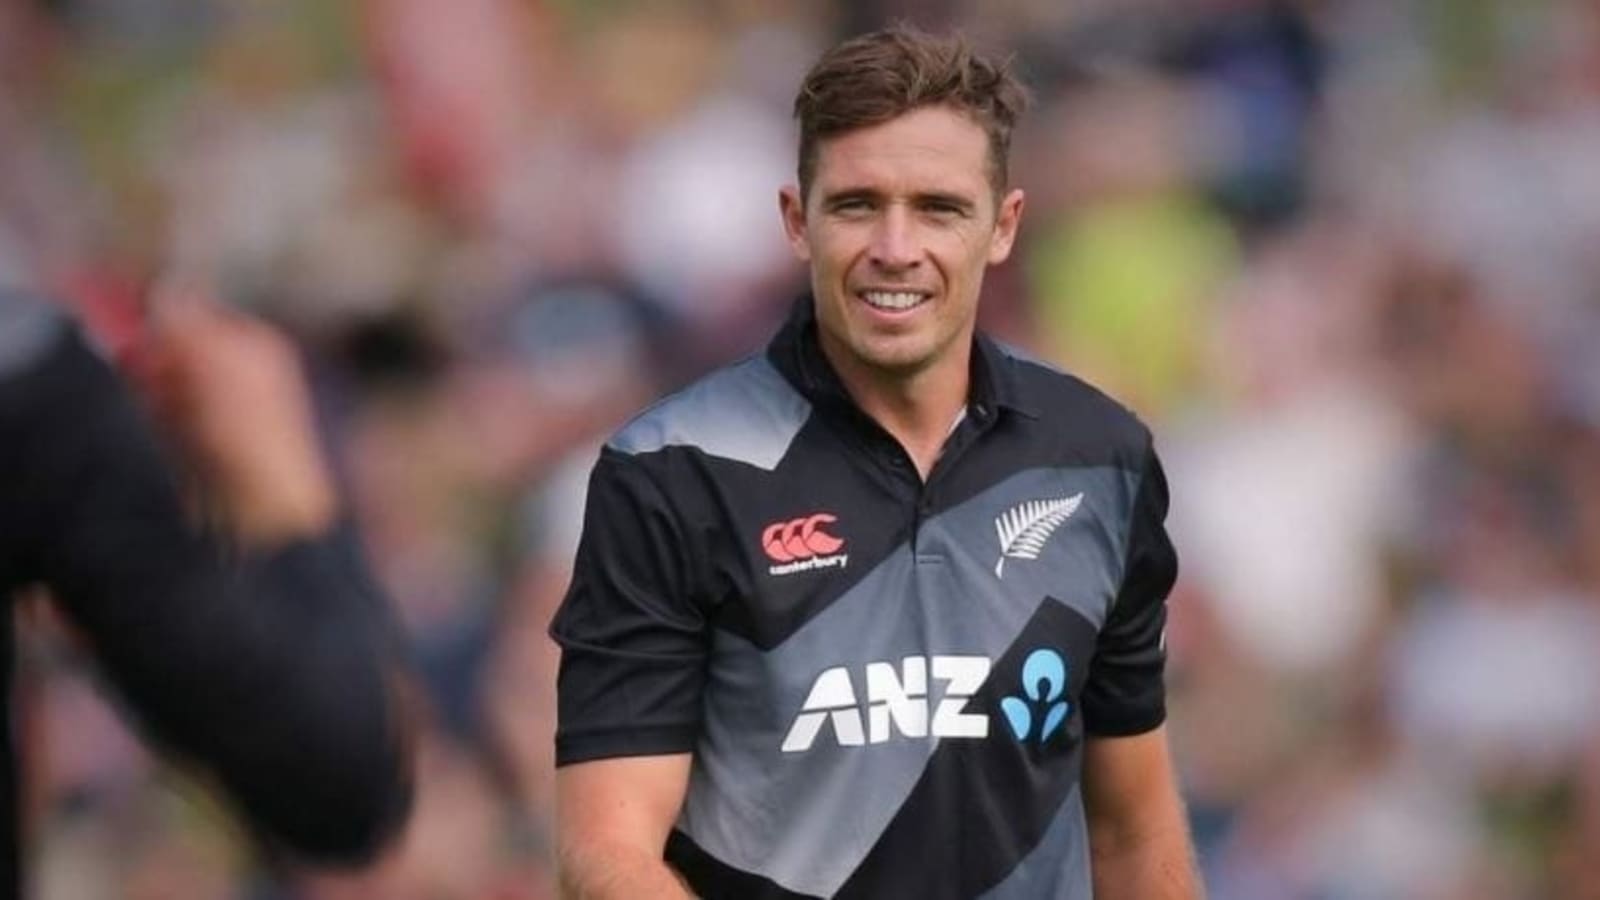 Tim Southee replaces Pat Cummins in KKR for remainder of IPL 2021 | Cricket  - Hindustan Times